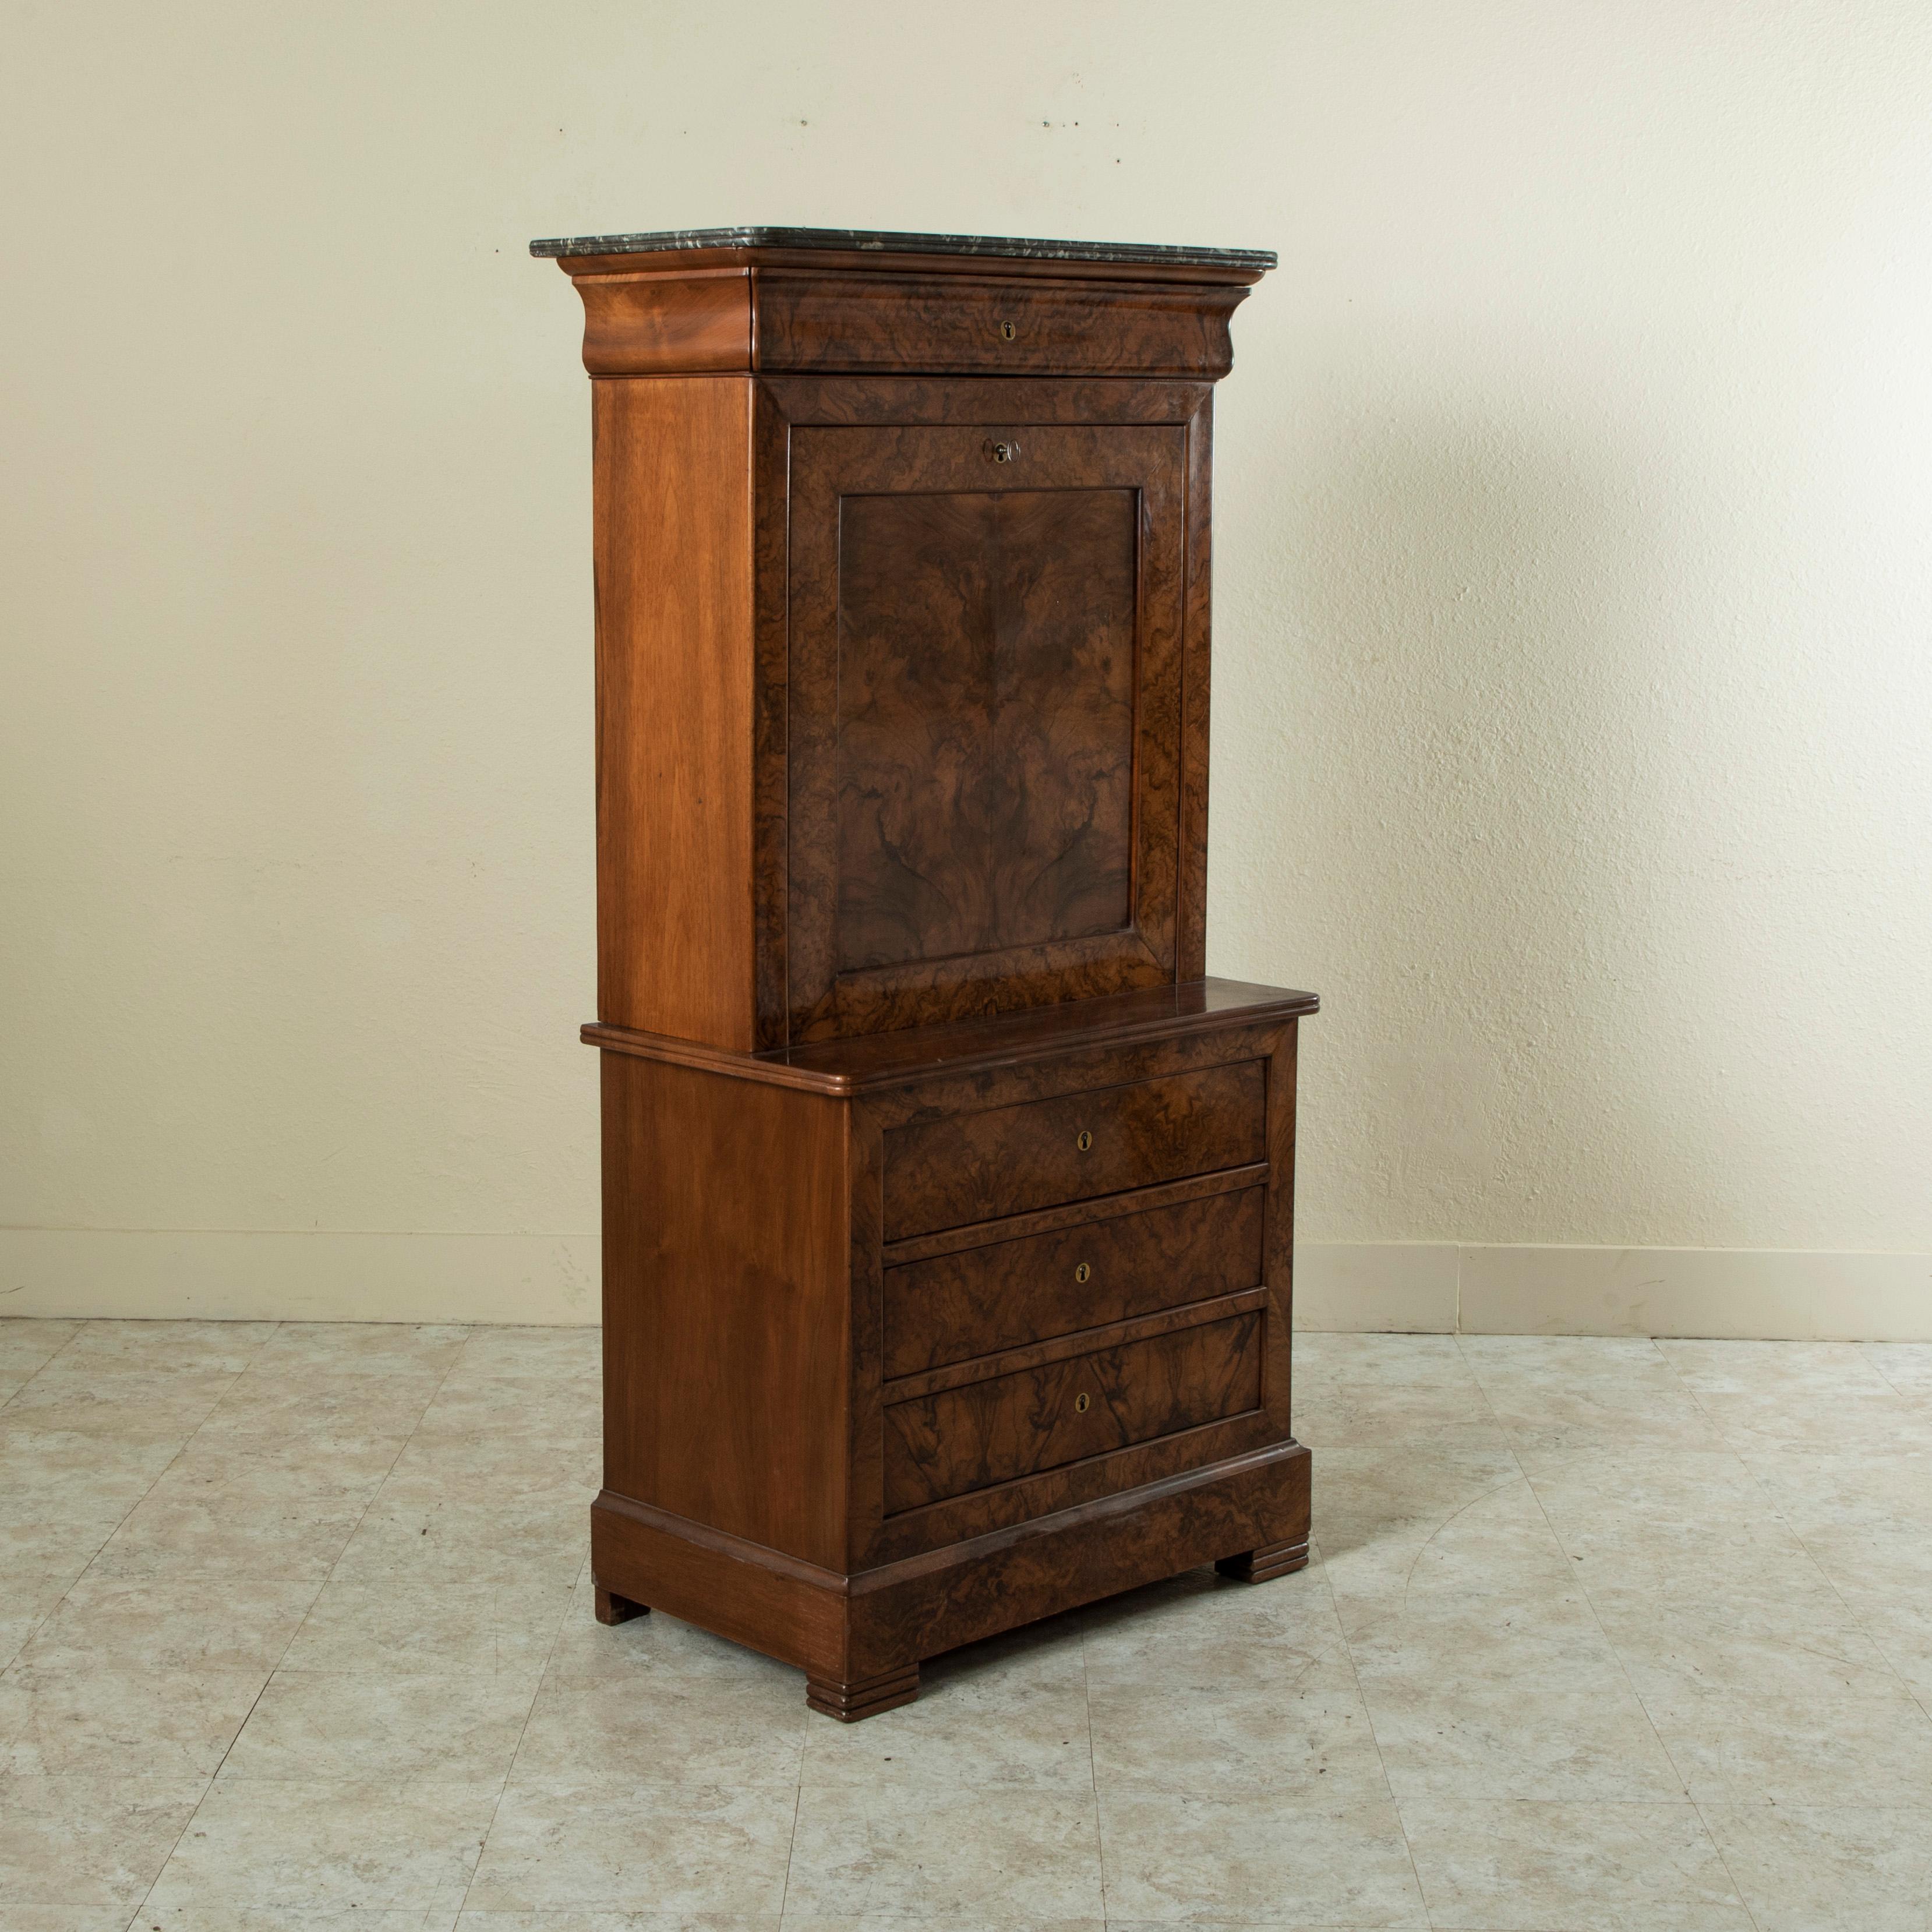 This nineteenth century Louis Philippe period secretary features an exquisite book matched burl walnut façade, an aesthetic that came to the forefront later during the Louis Philippe period of the 1830s. Its drop down front opens to reveal a tooled